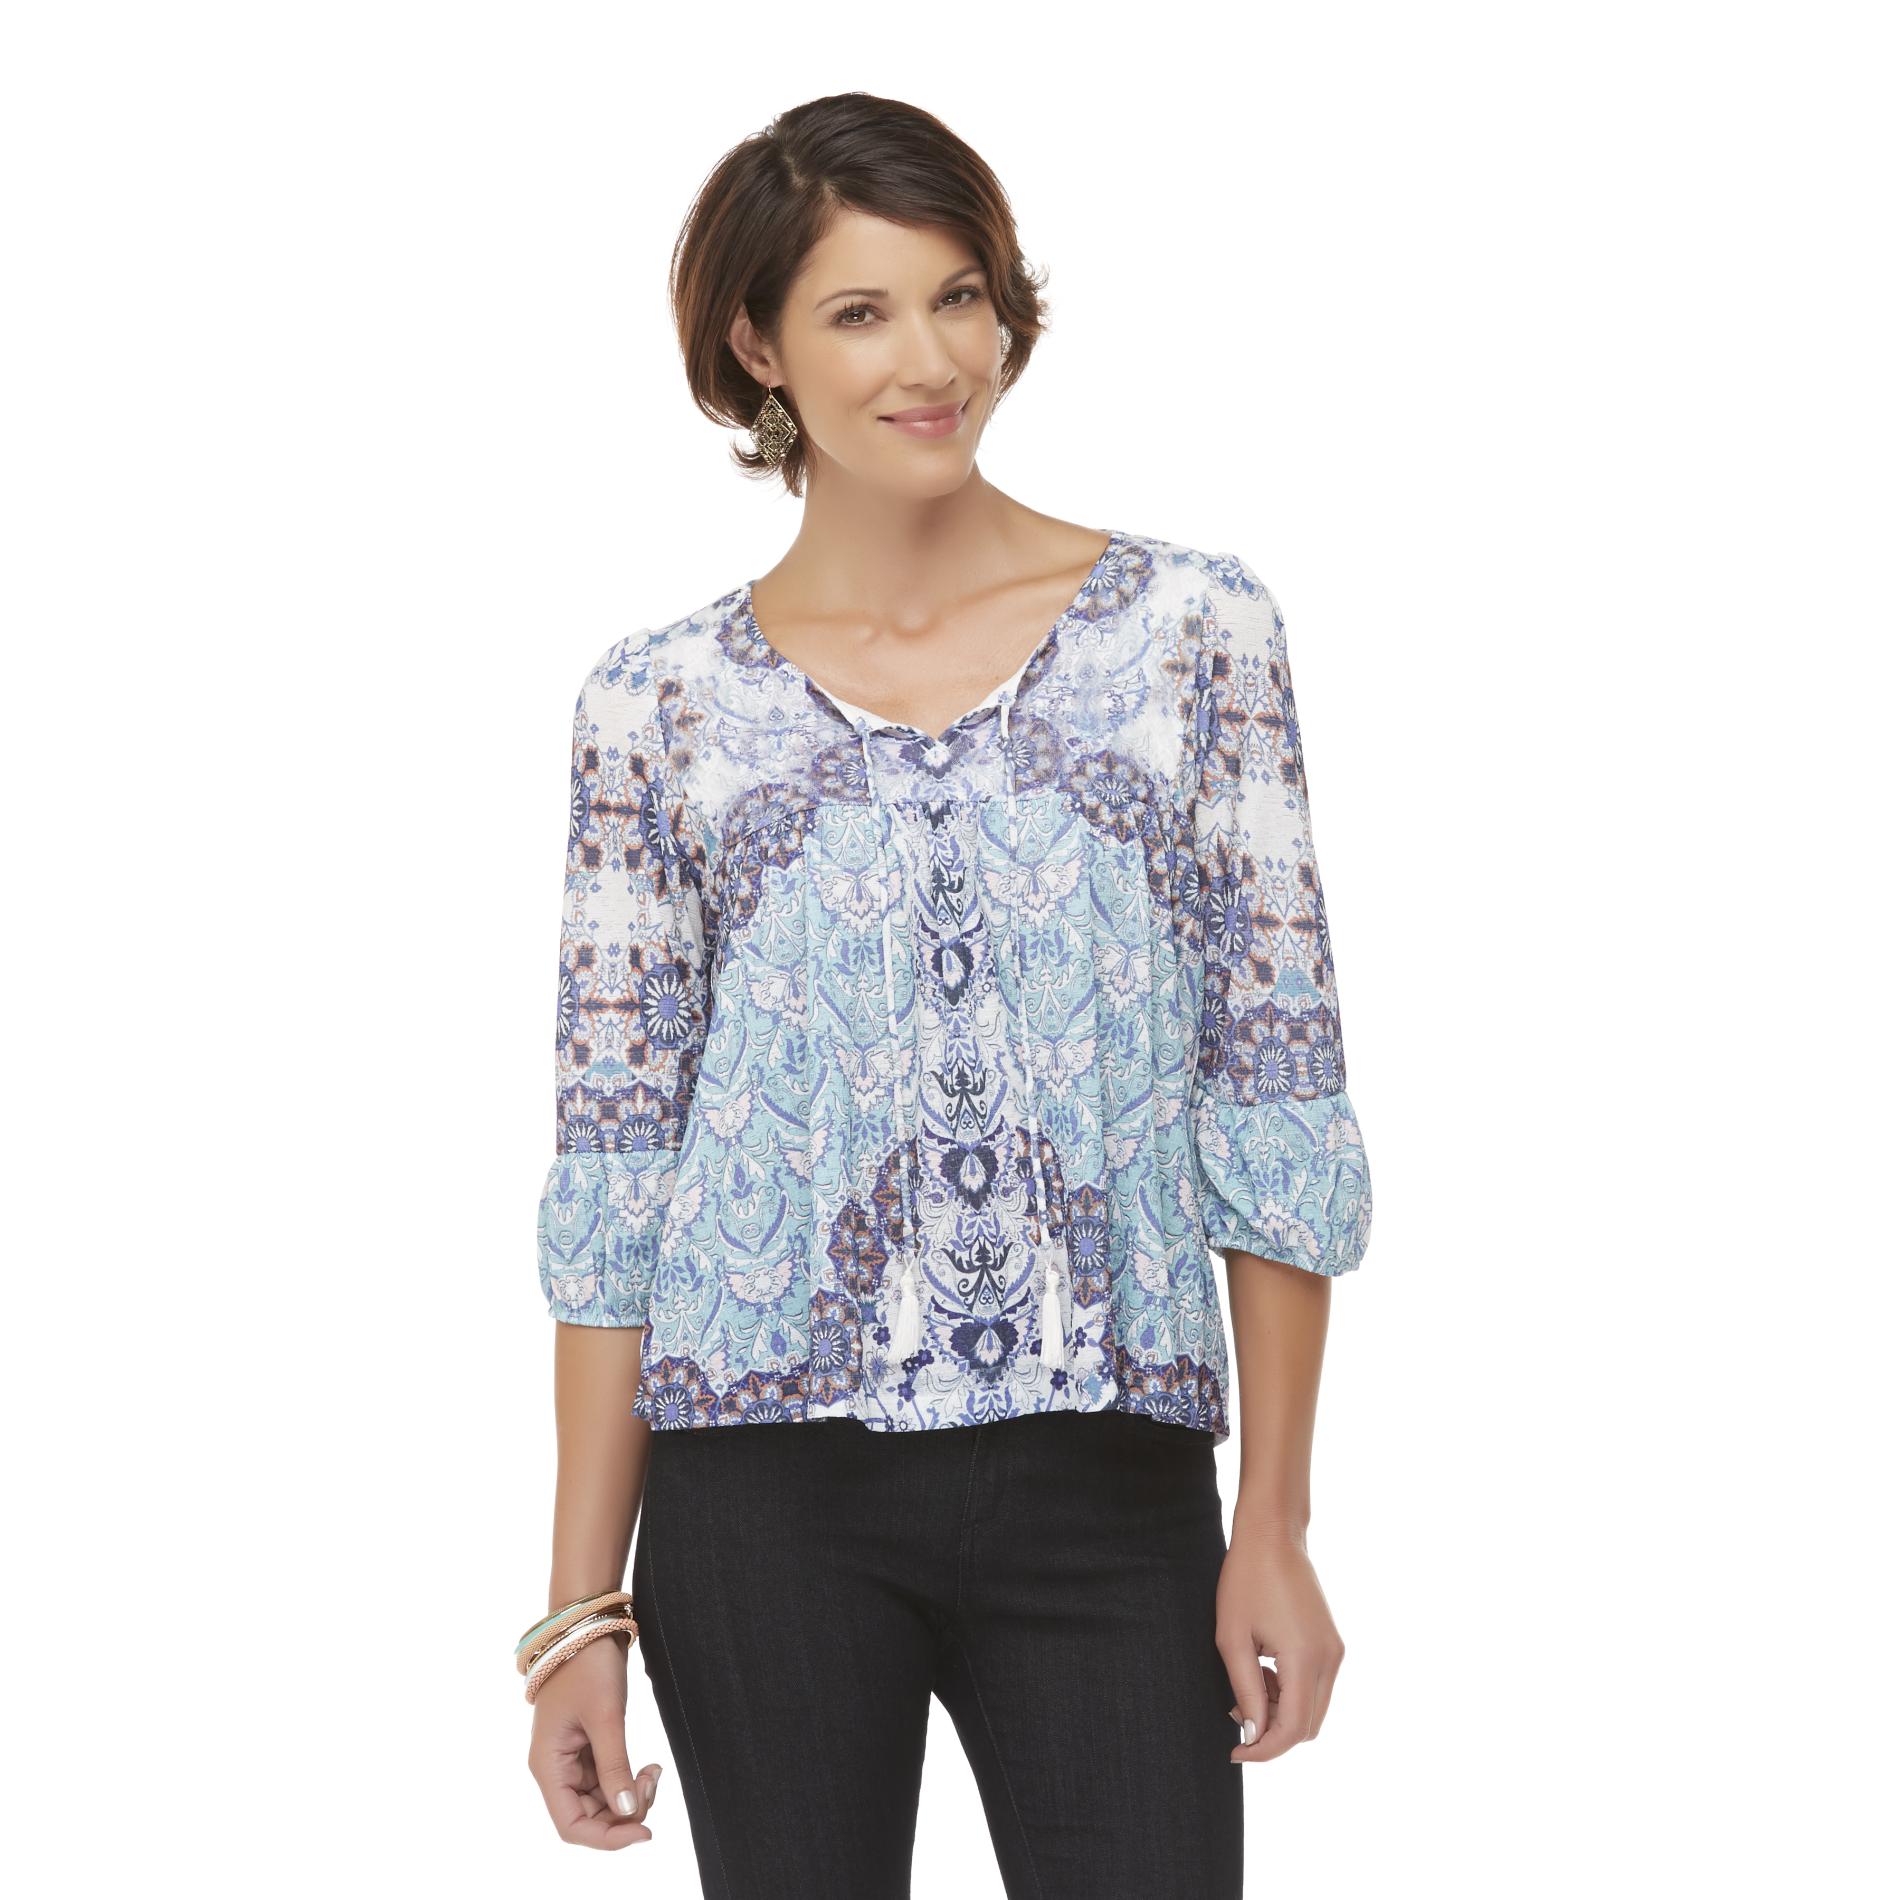 Live and Let Live Women's Peasant Top - Floral Damask